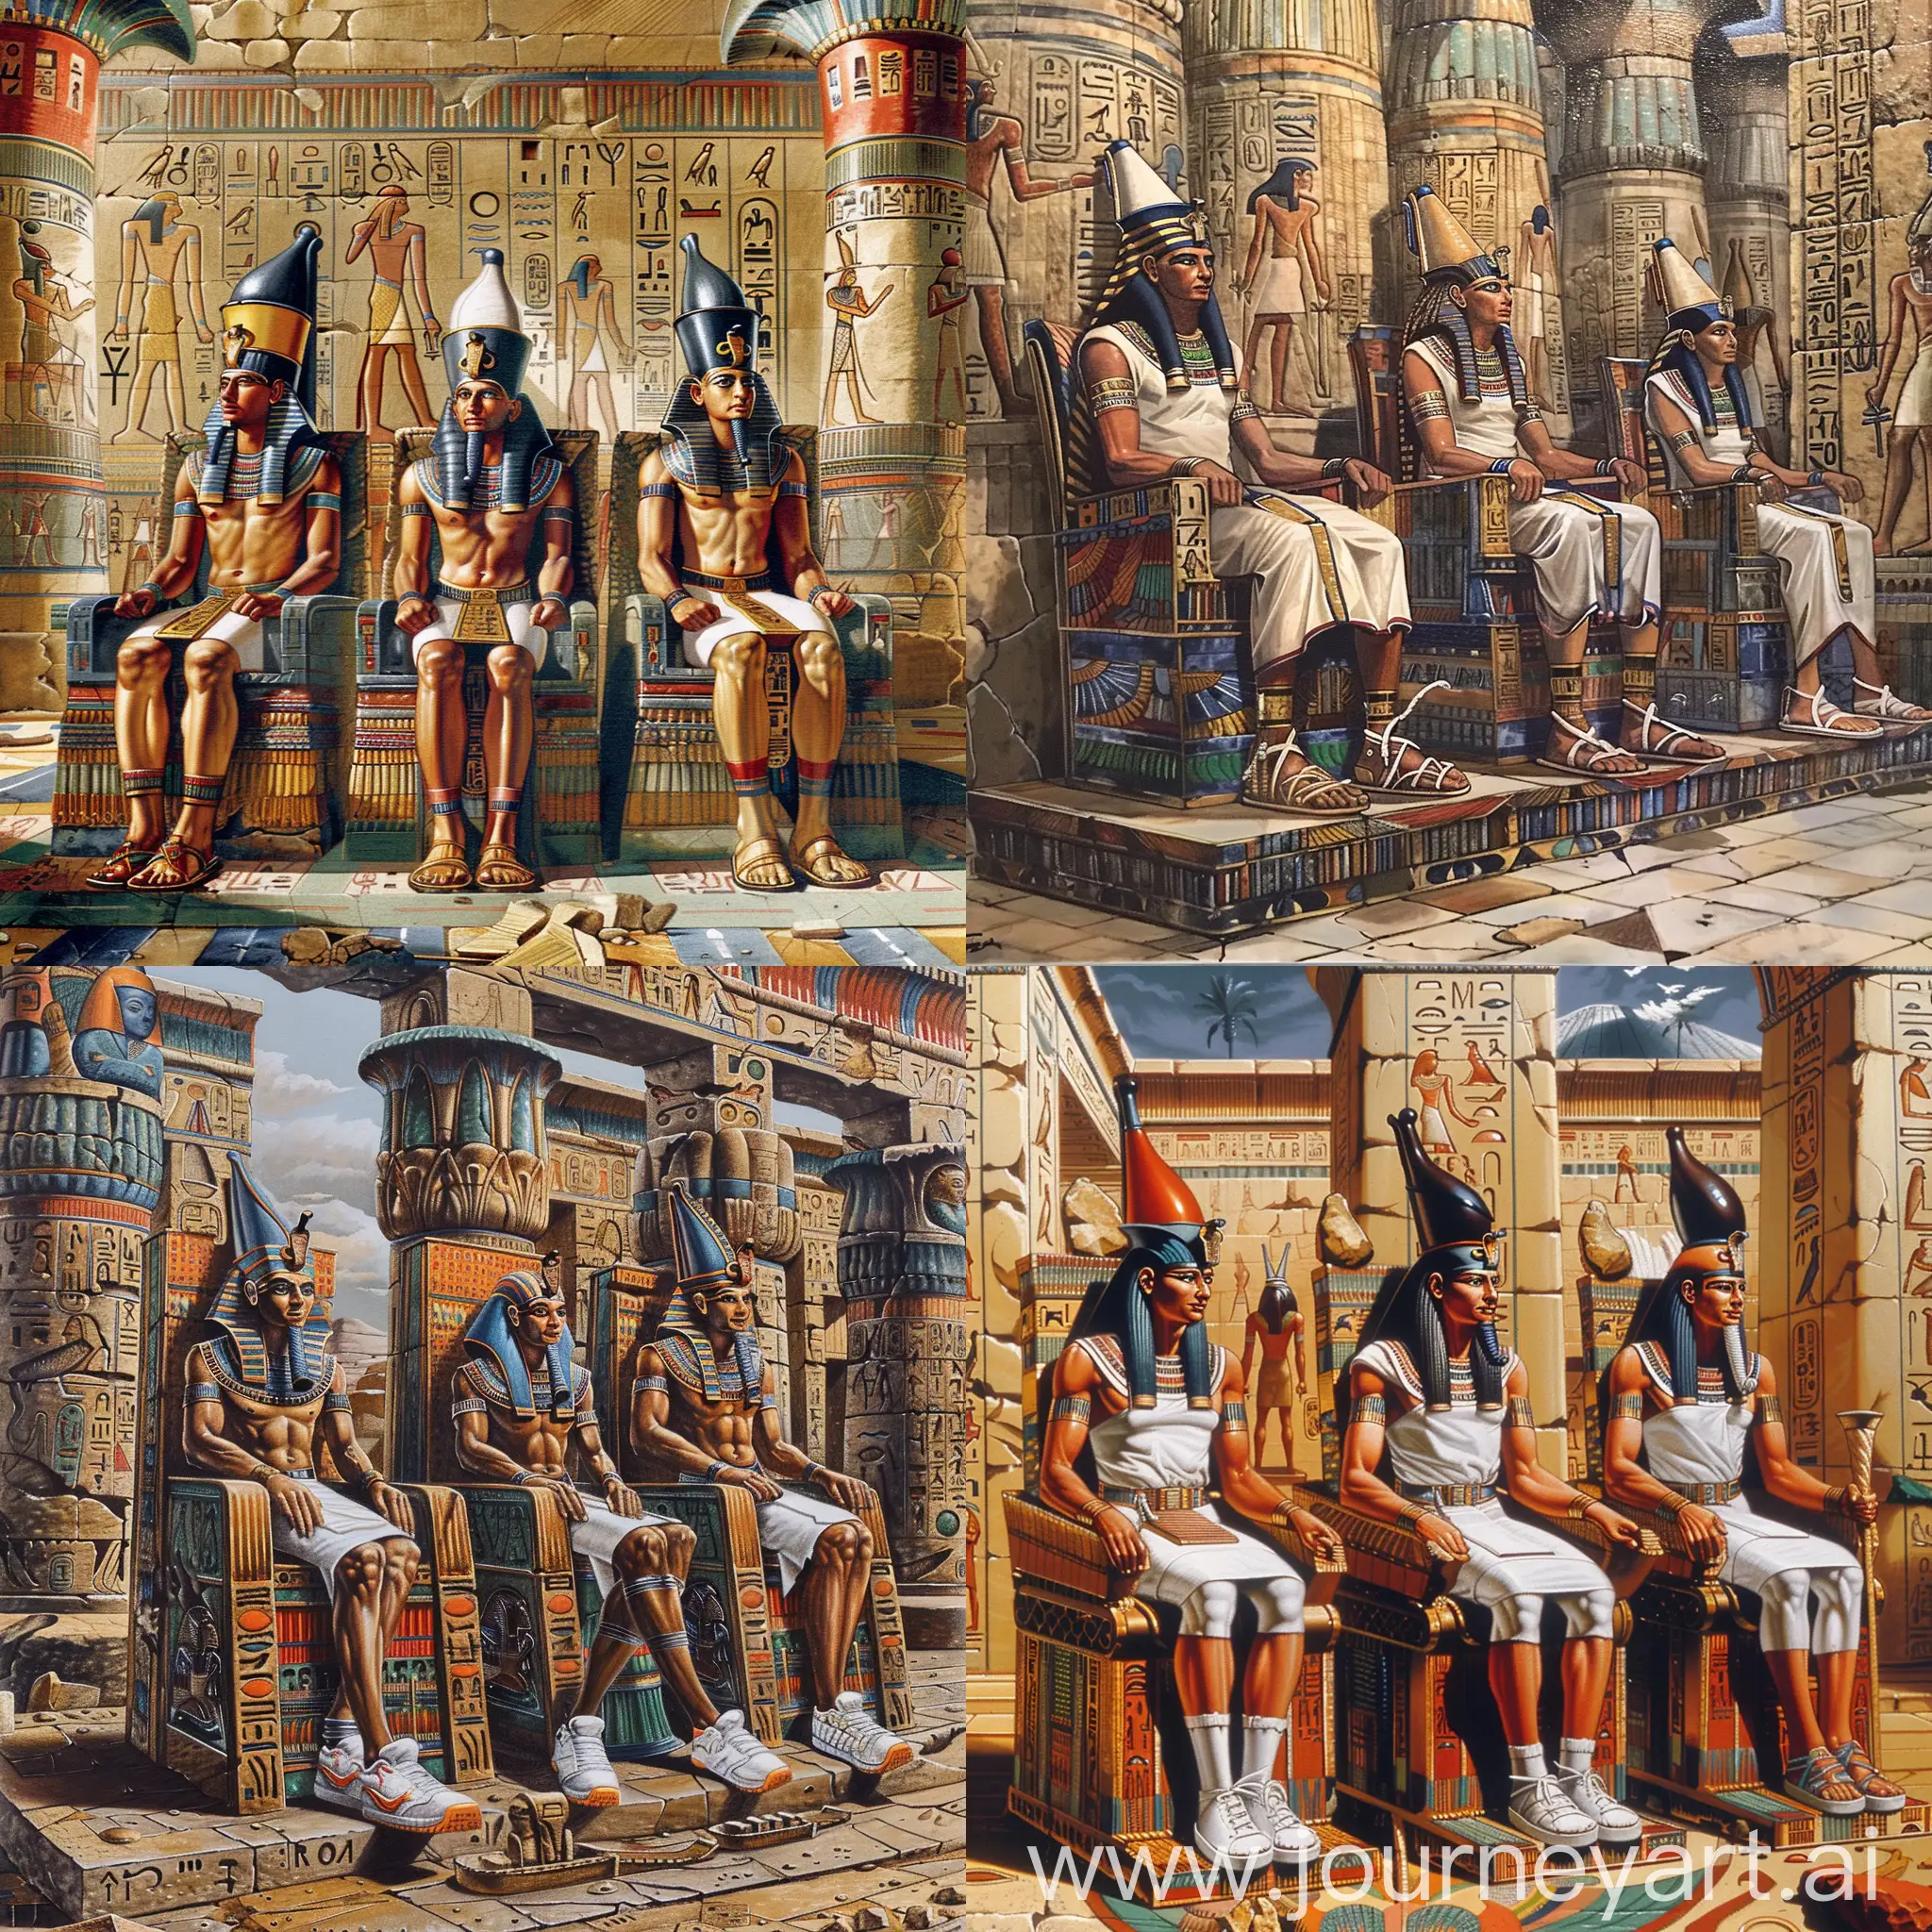 Egyptian-Deities-in-Regal-Attire-within-a-Majestic-Temple